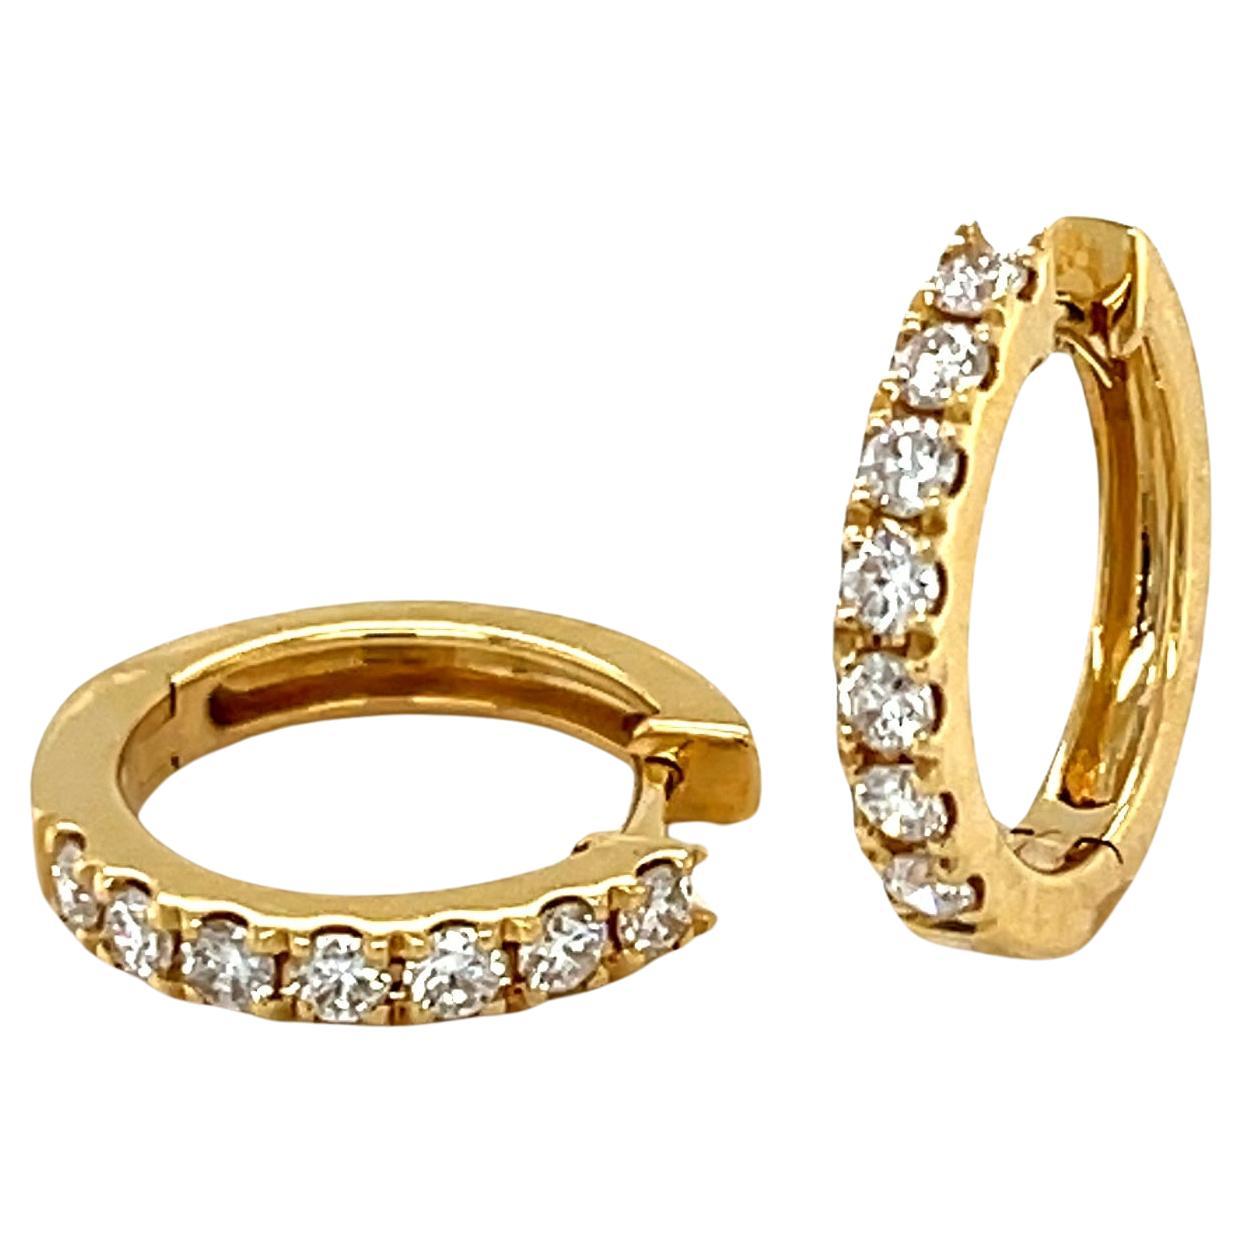 Diamond Hoop Earrings in 18k Yellow Gold with Hinged Backs, .48 Carats Total